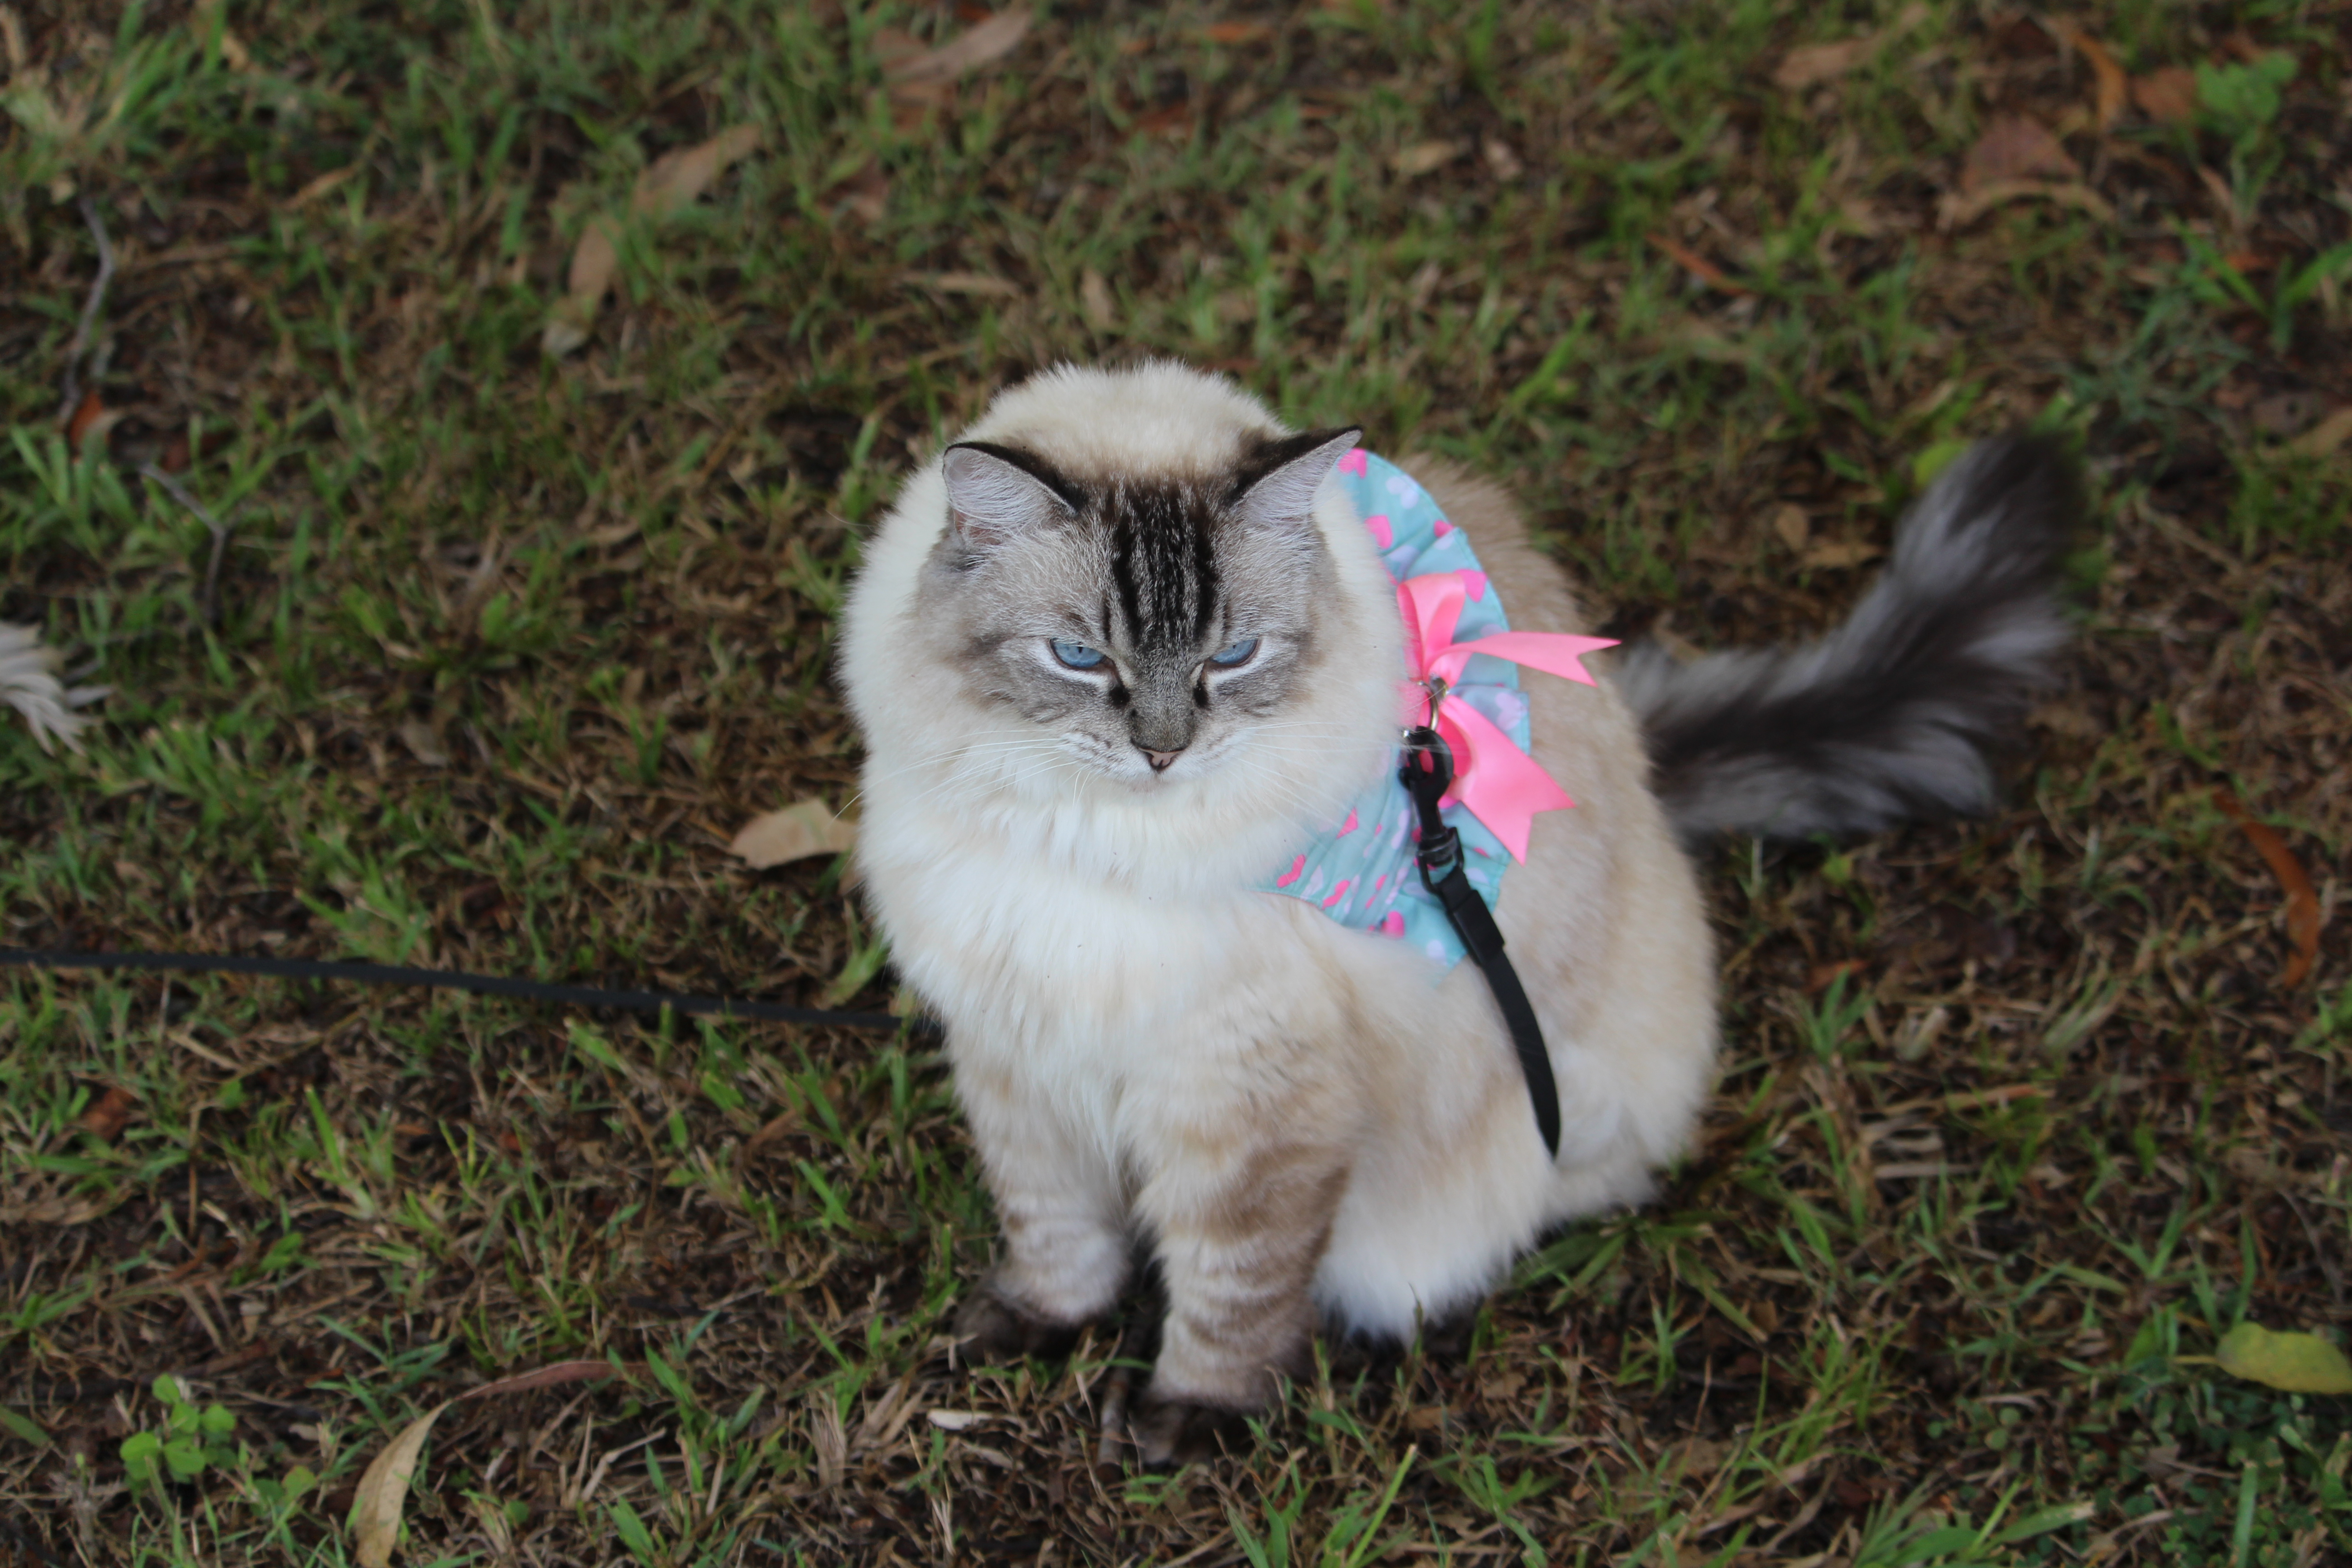 Here's Kitty Nomad, Misty-Rose, wearing her soft harness and retractable lead.